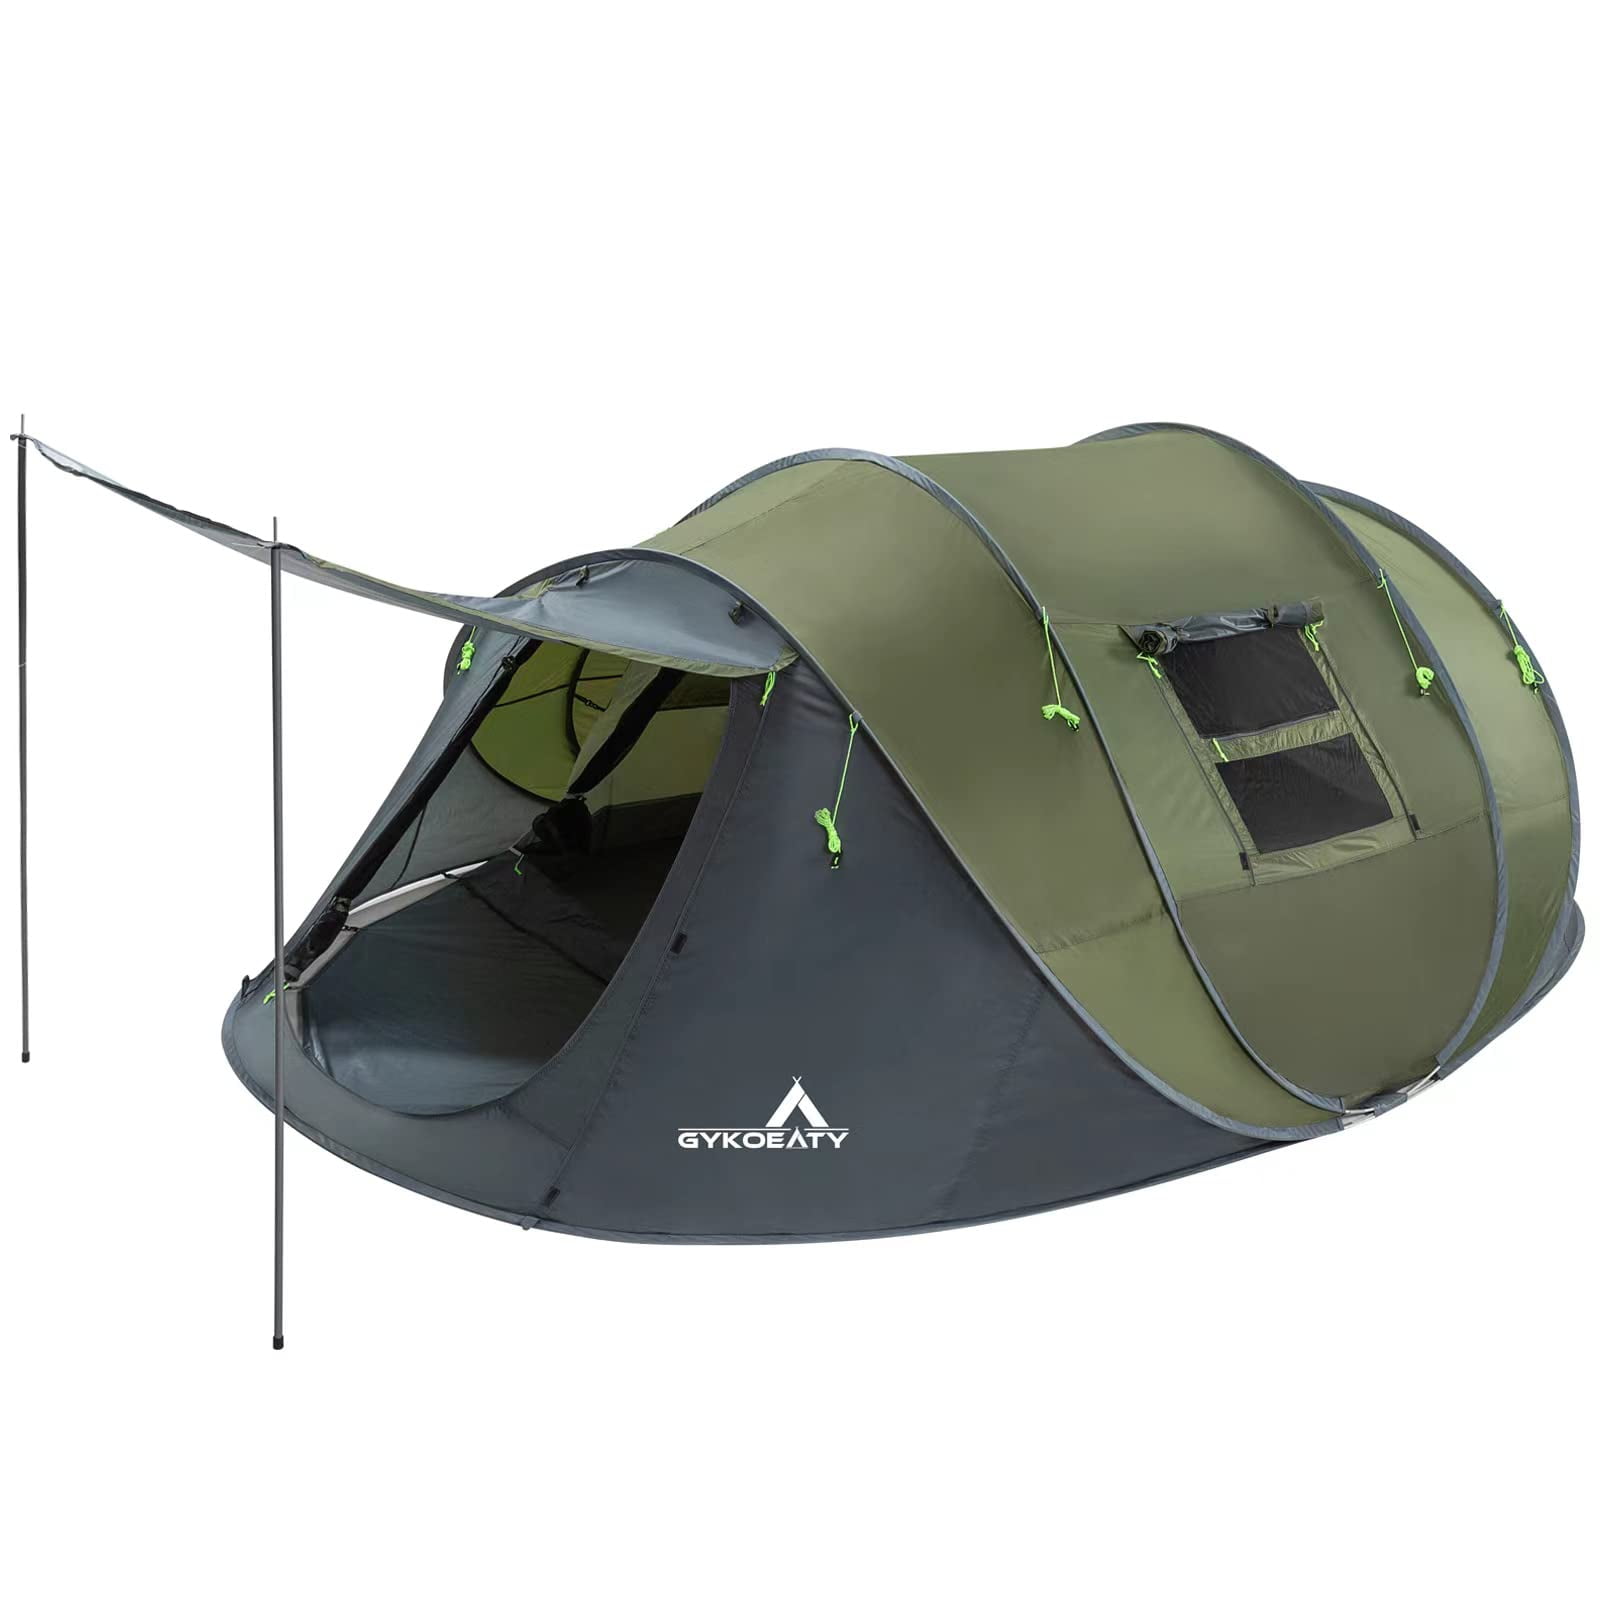 6 Person Easy Pop Up Tent,12.5'X8.5'X53.5'',Automatic Setup